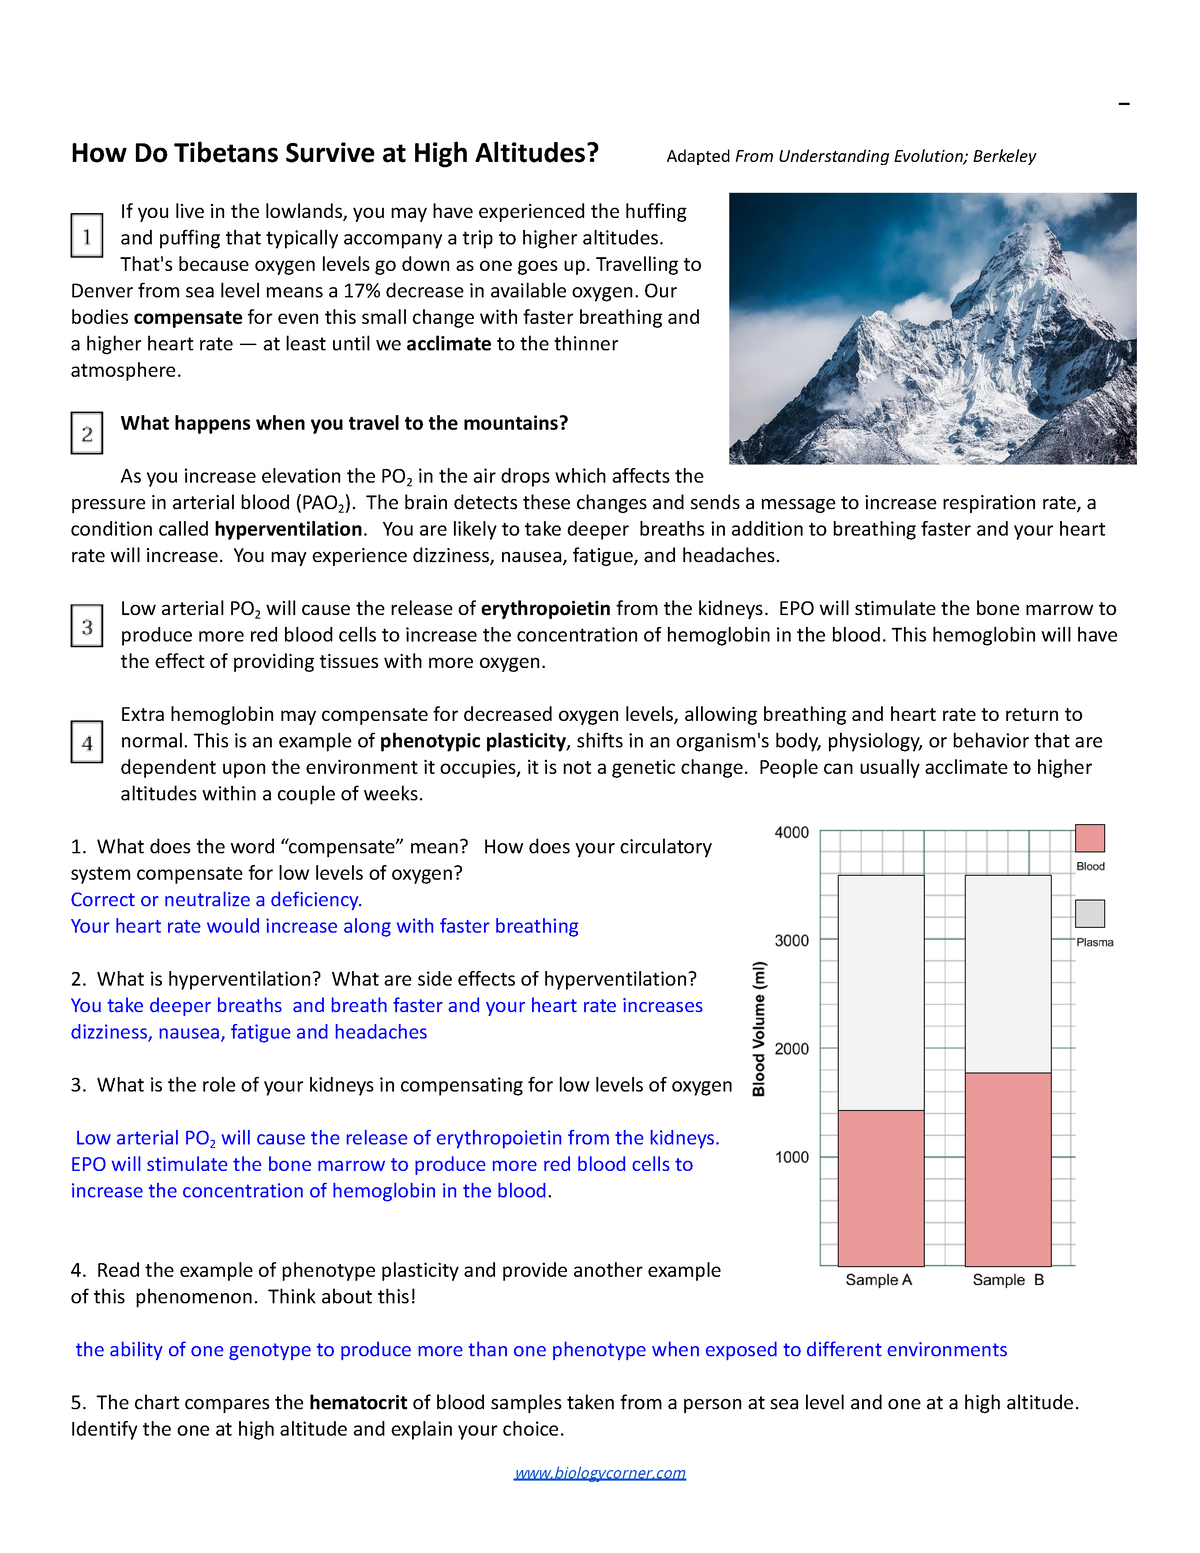 case study tibetans and high altitudes answers